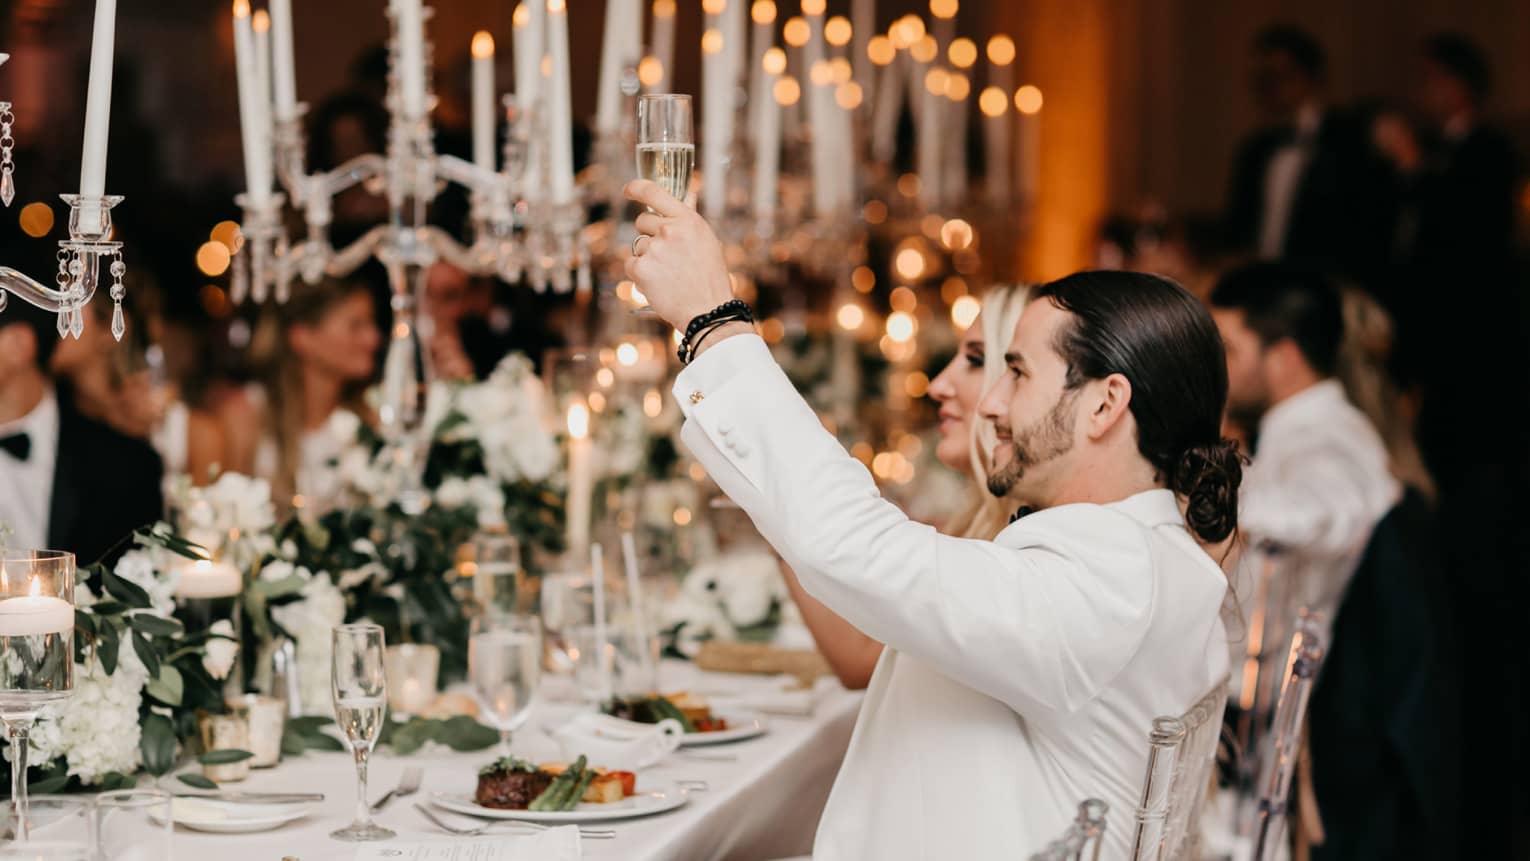 Wedding guests raise glasses during toast at candlelit banquet table